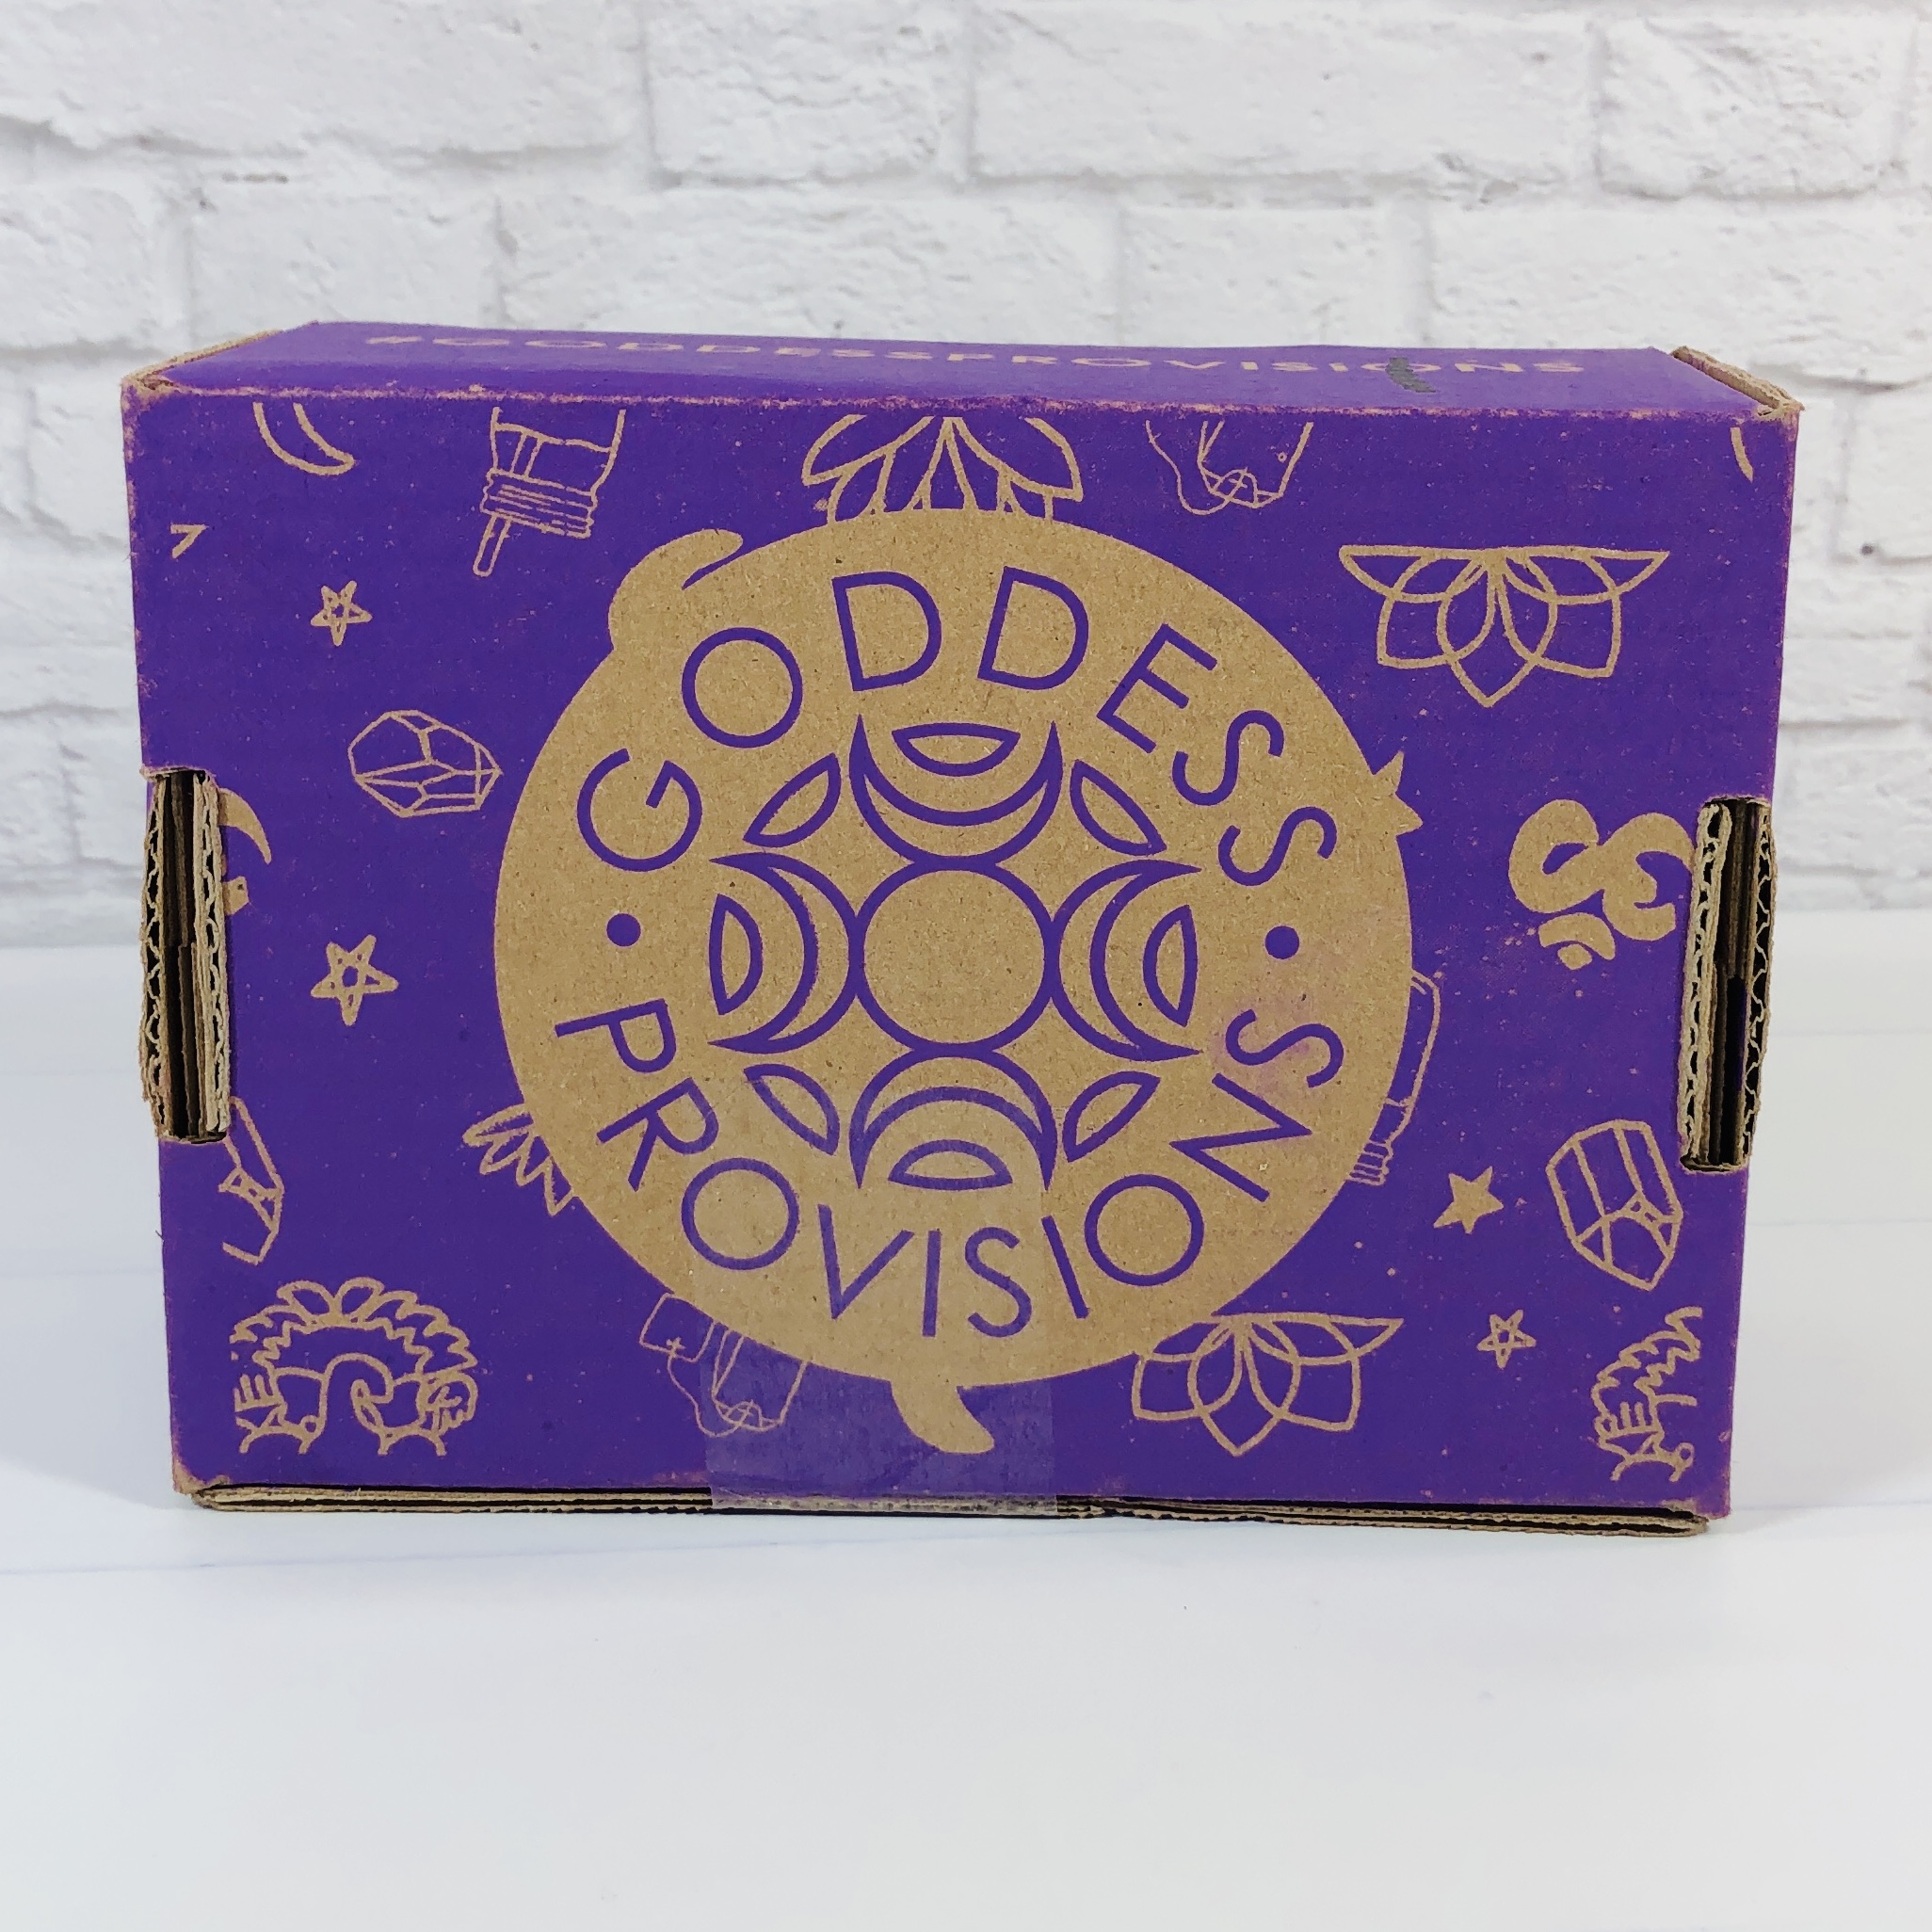 Goddess Provisions June 2021 Subscription Box Review Hello Subscription